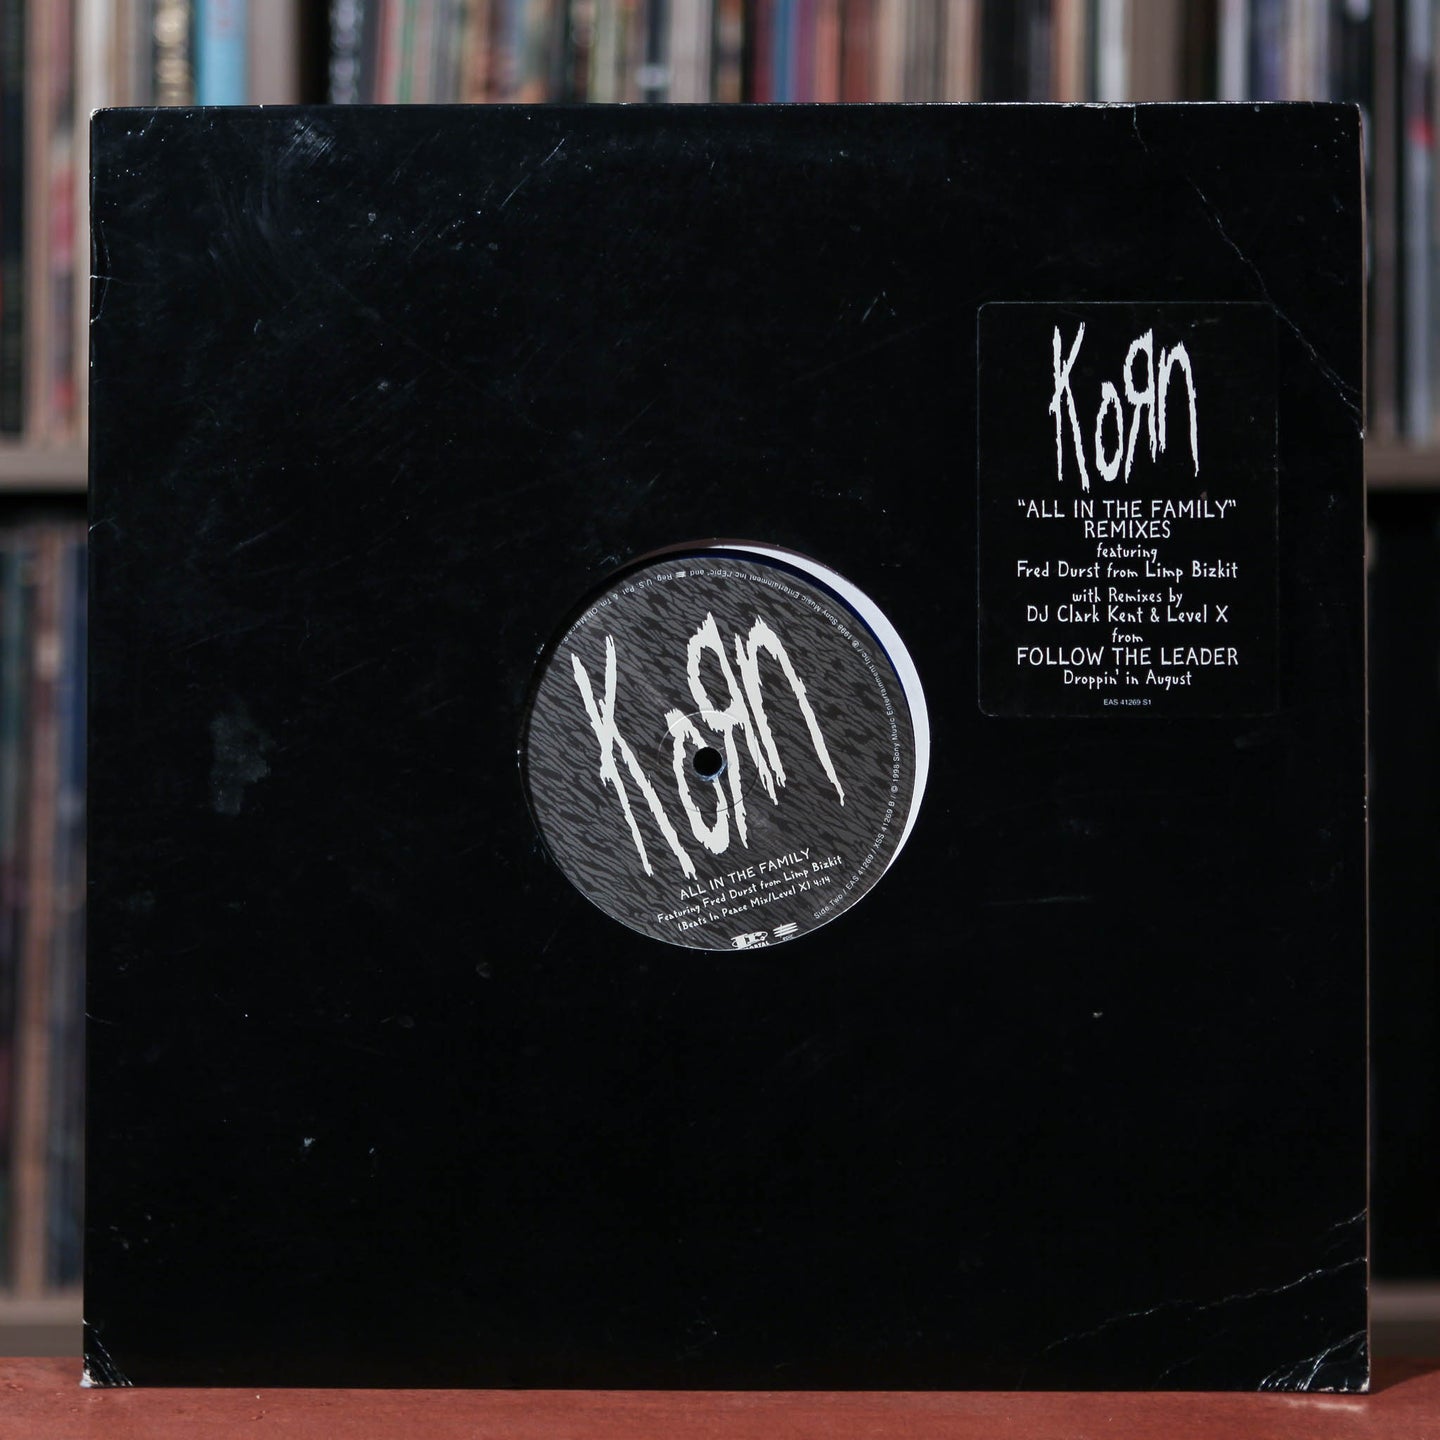 Korn - All in the Family Remixes - 1998 Epic - 12